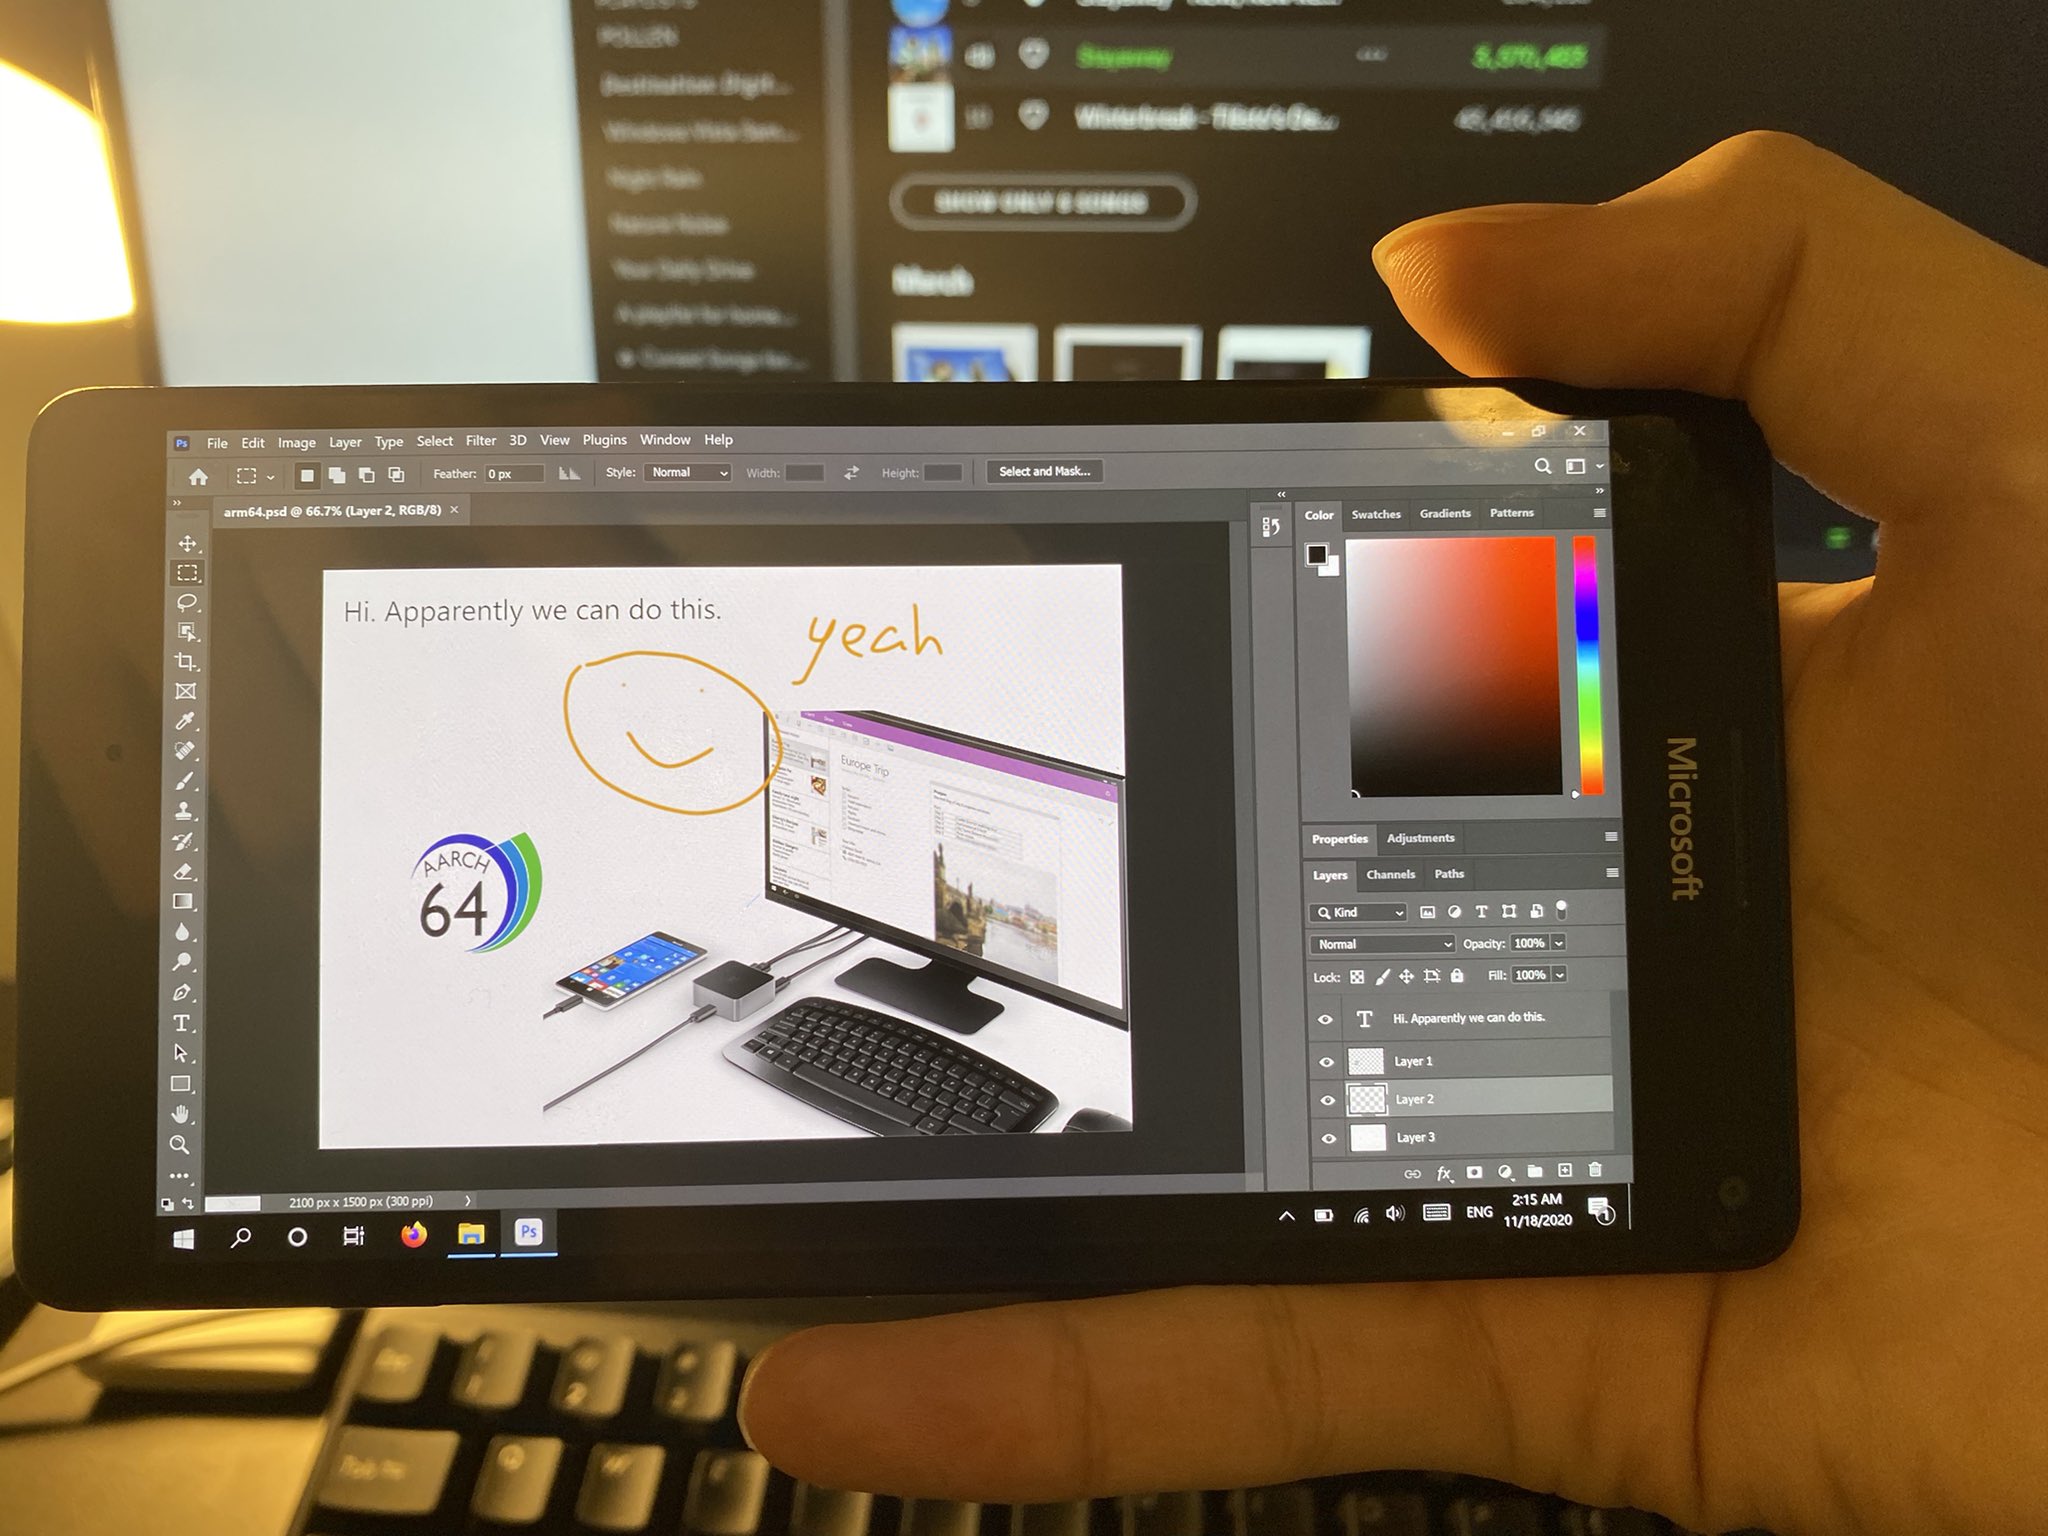 Lumia smartphone with Windows 10 ARM spotted running Adobe Photoshop